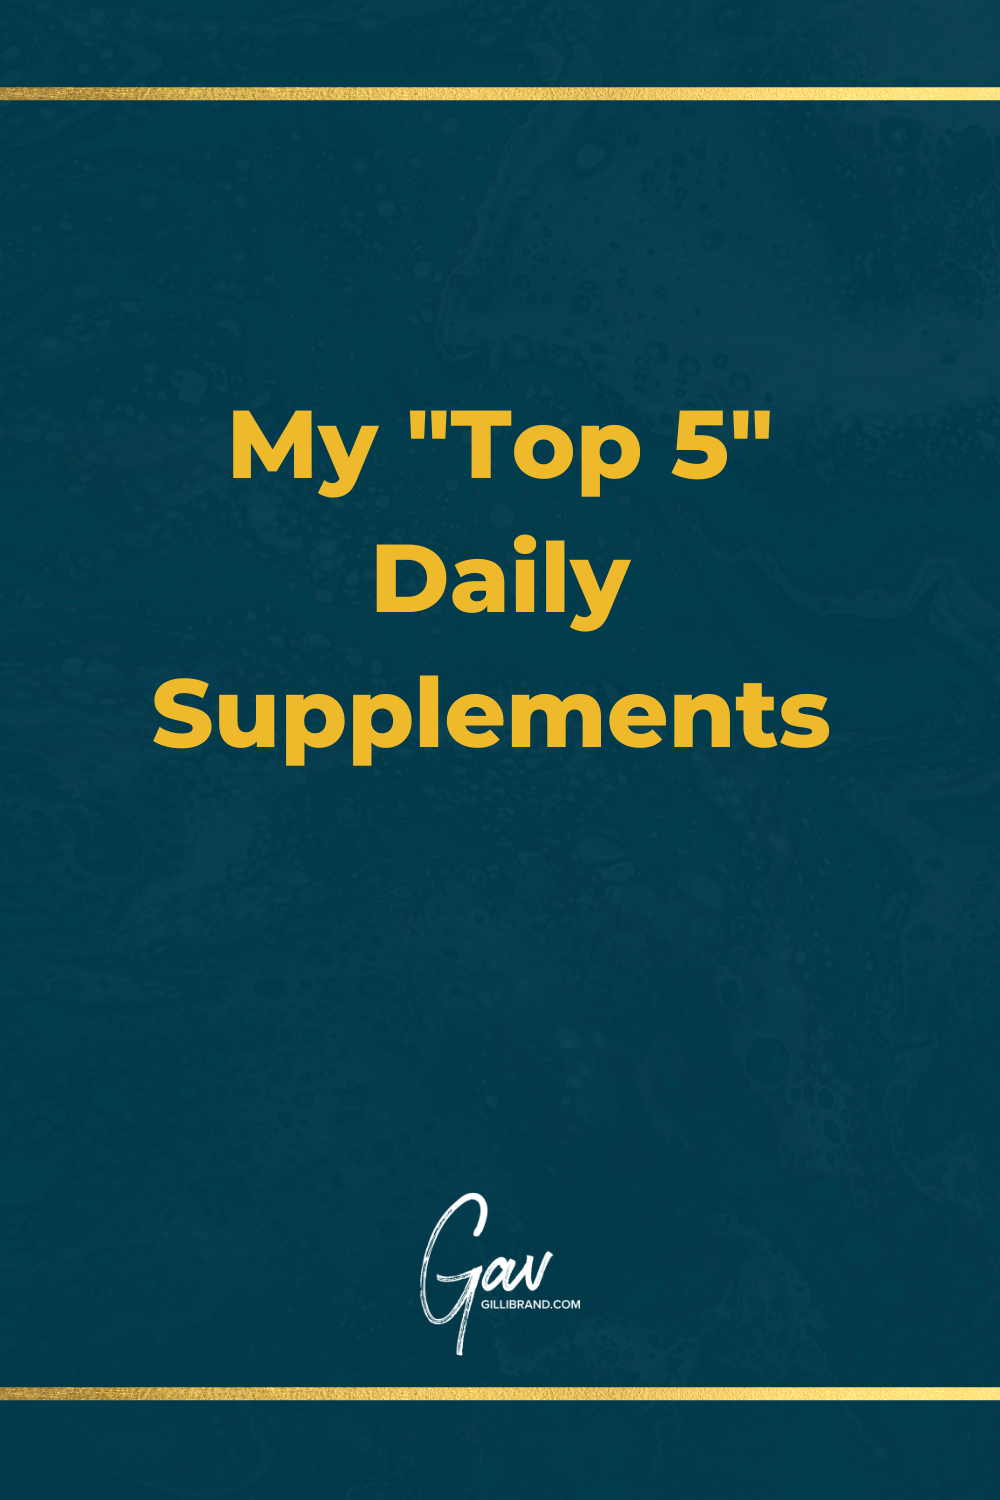 Featured image for “My Top 5 Daily Supplements”